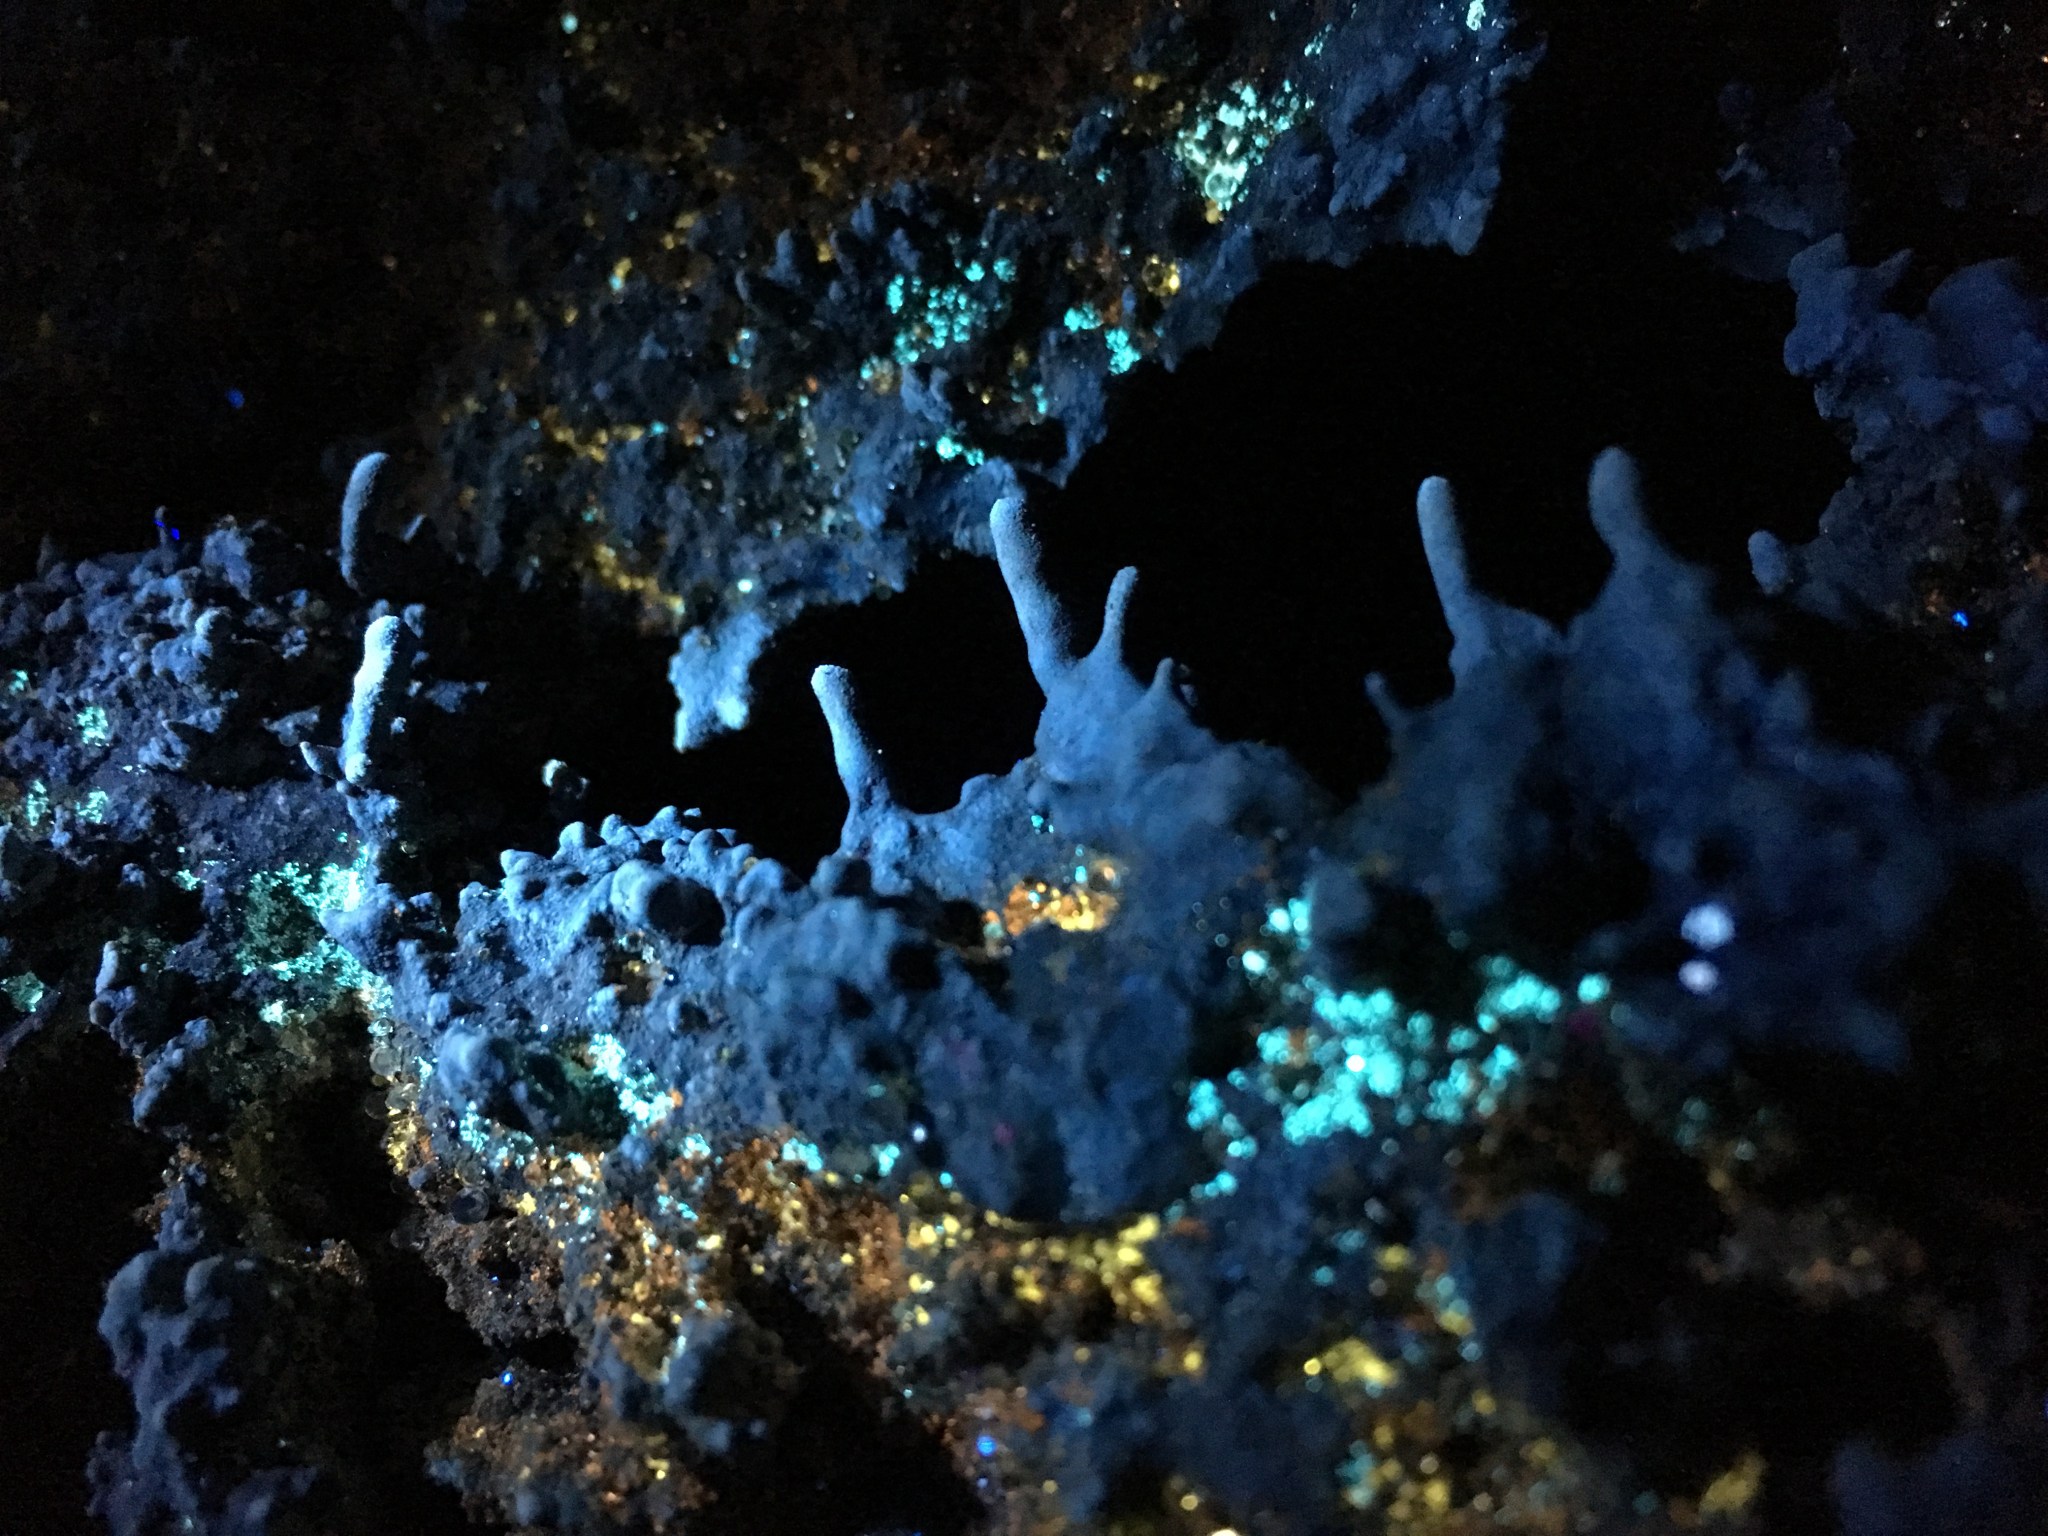 A cave wall glowing with green, yellow and orange microbes.